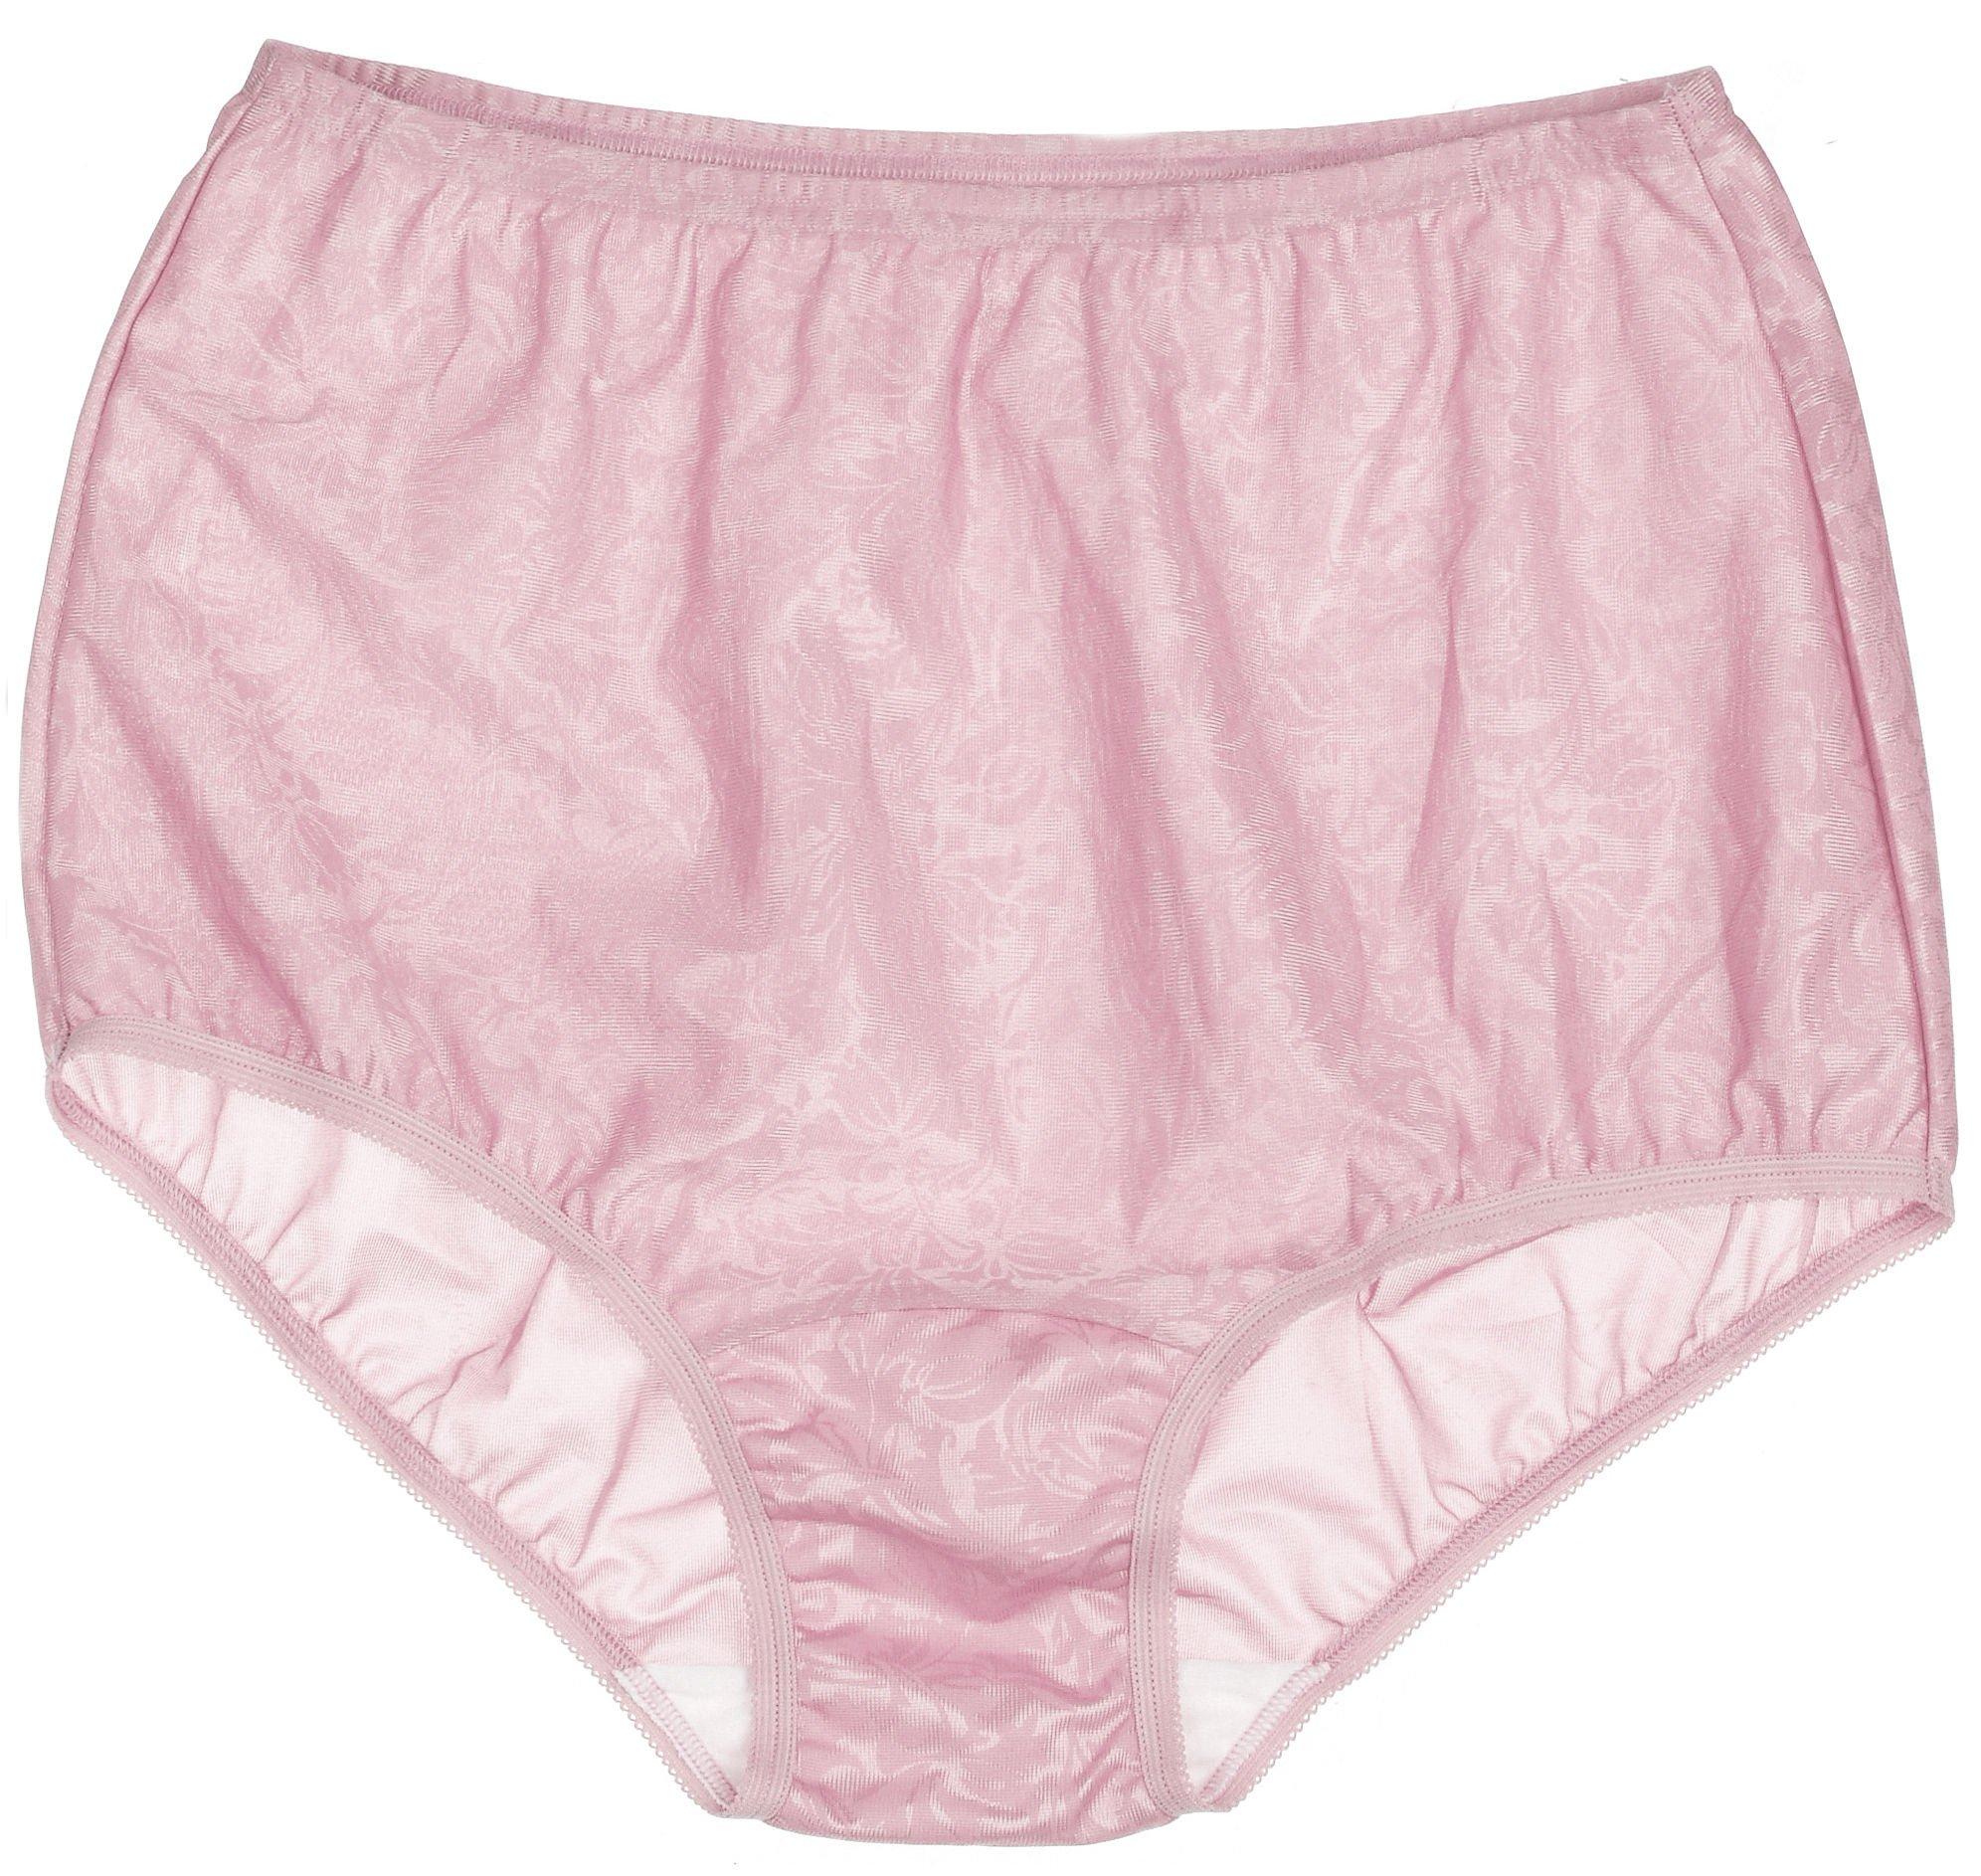 Vintage New With Original Tags Vanity Fair Tailored Ravissant Full Brief  Panty Blushing Pink -  Sweden